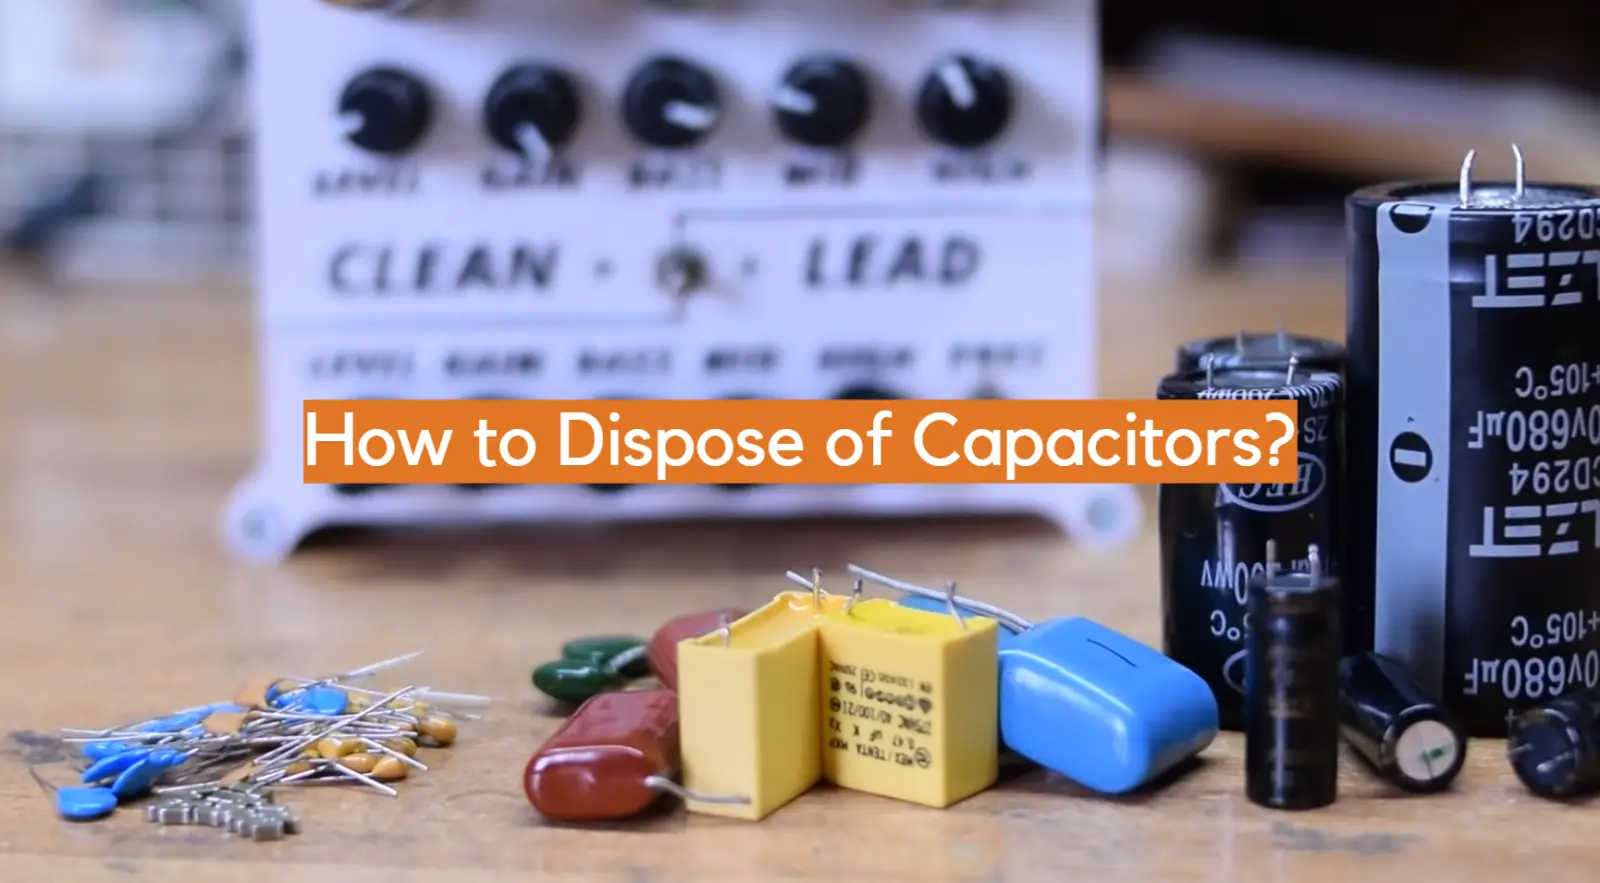 How to Dispose of Capacitors?